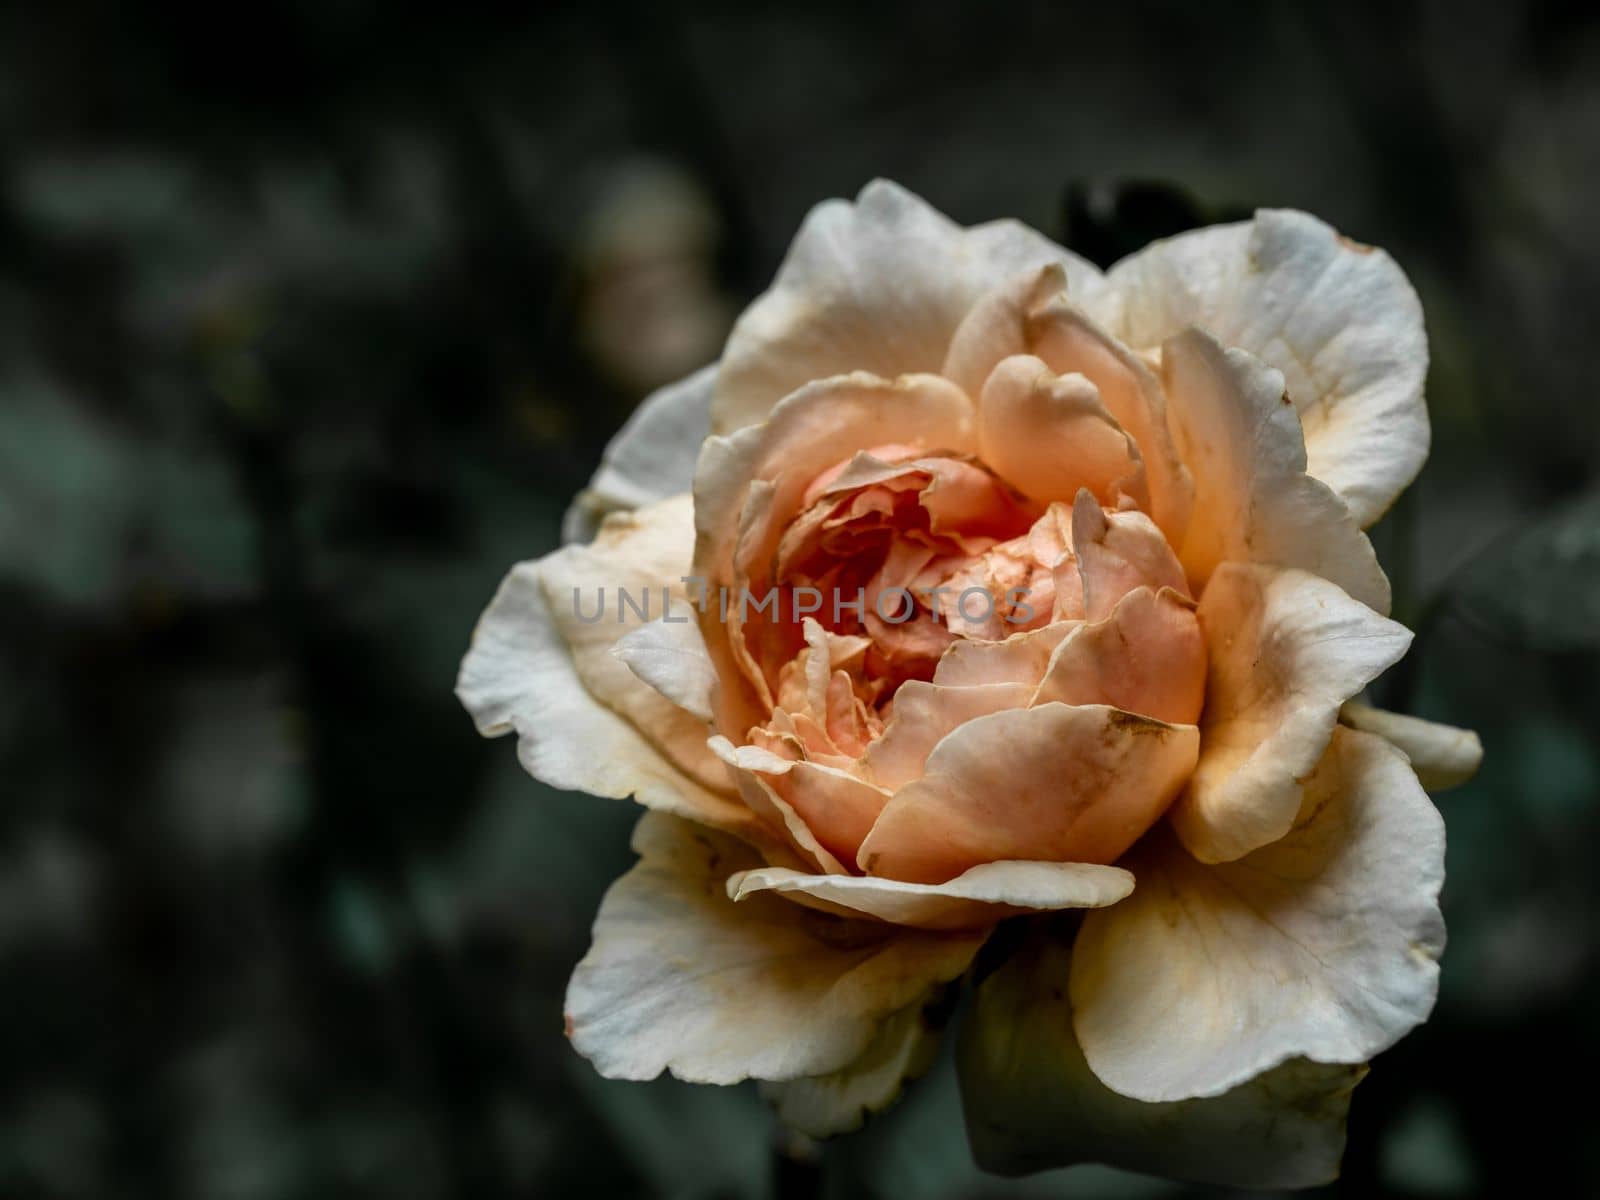 The wounded petals of a withering Masora roses